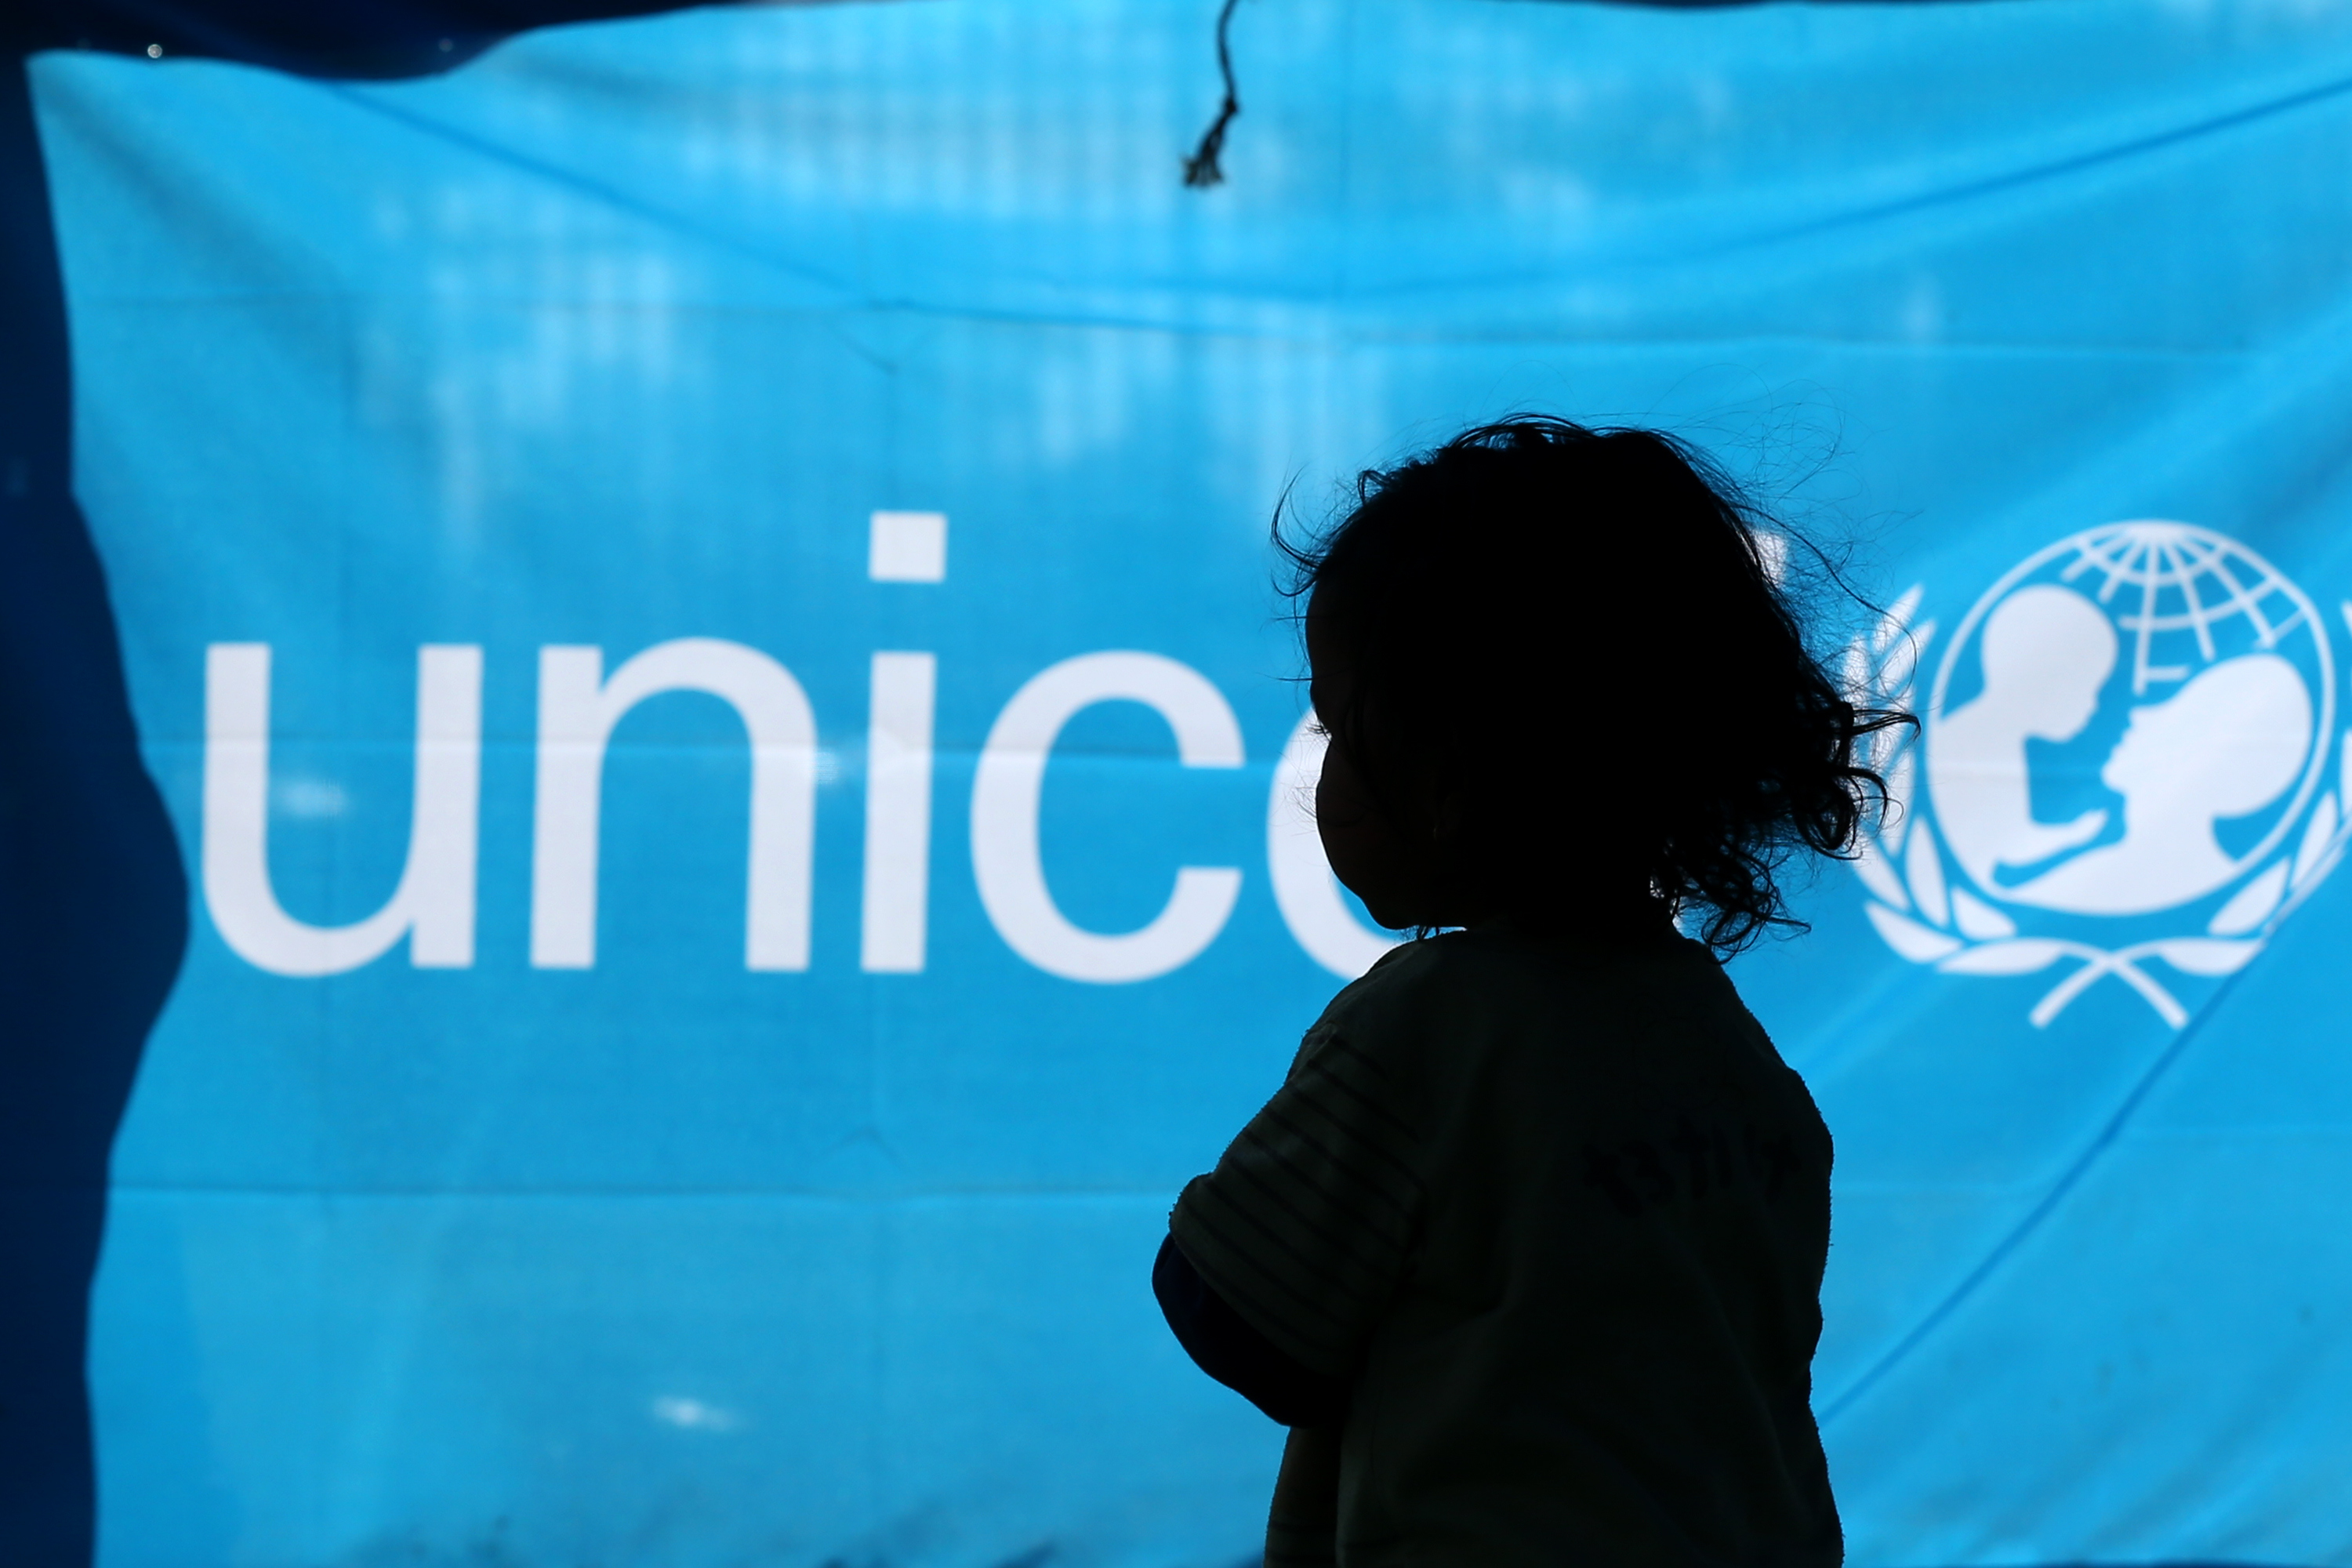 A young girl who was displaced by the earthquake walks inside a UNICEF tent at Tudhikhel makeshift camp in Kathmandu, Nepal on May 4, 2015. (Buddhika Weerasinghe—Getty Images)